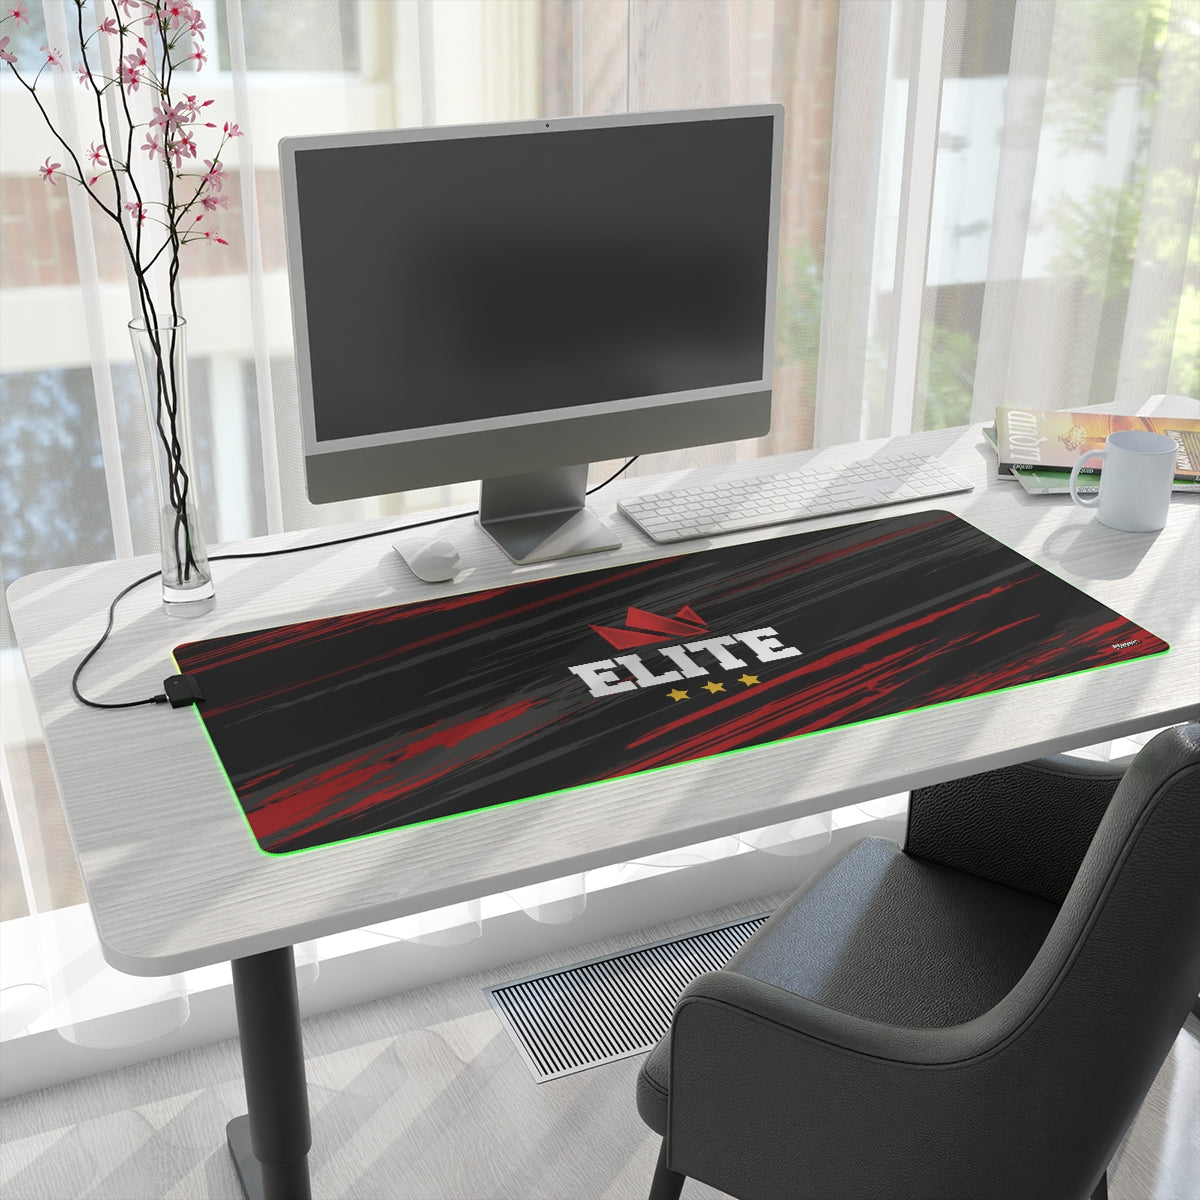 EliteTeam.Tv LED Gaming Mouse Pad